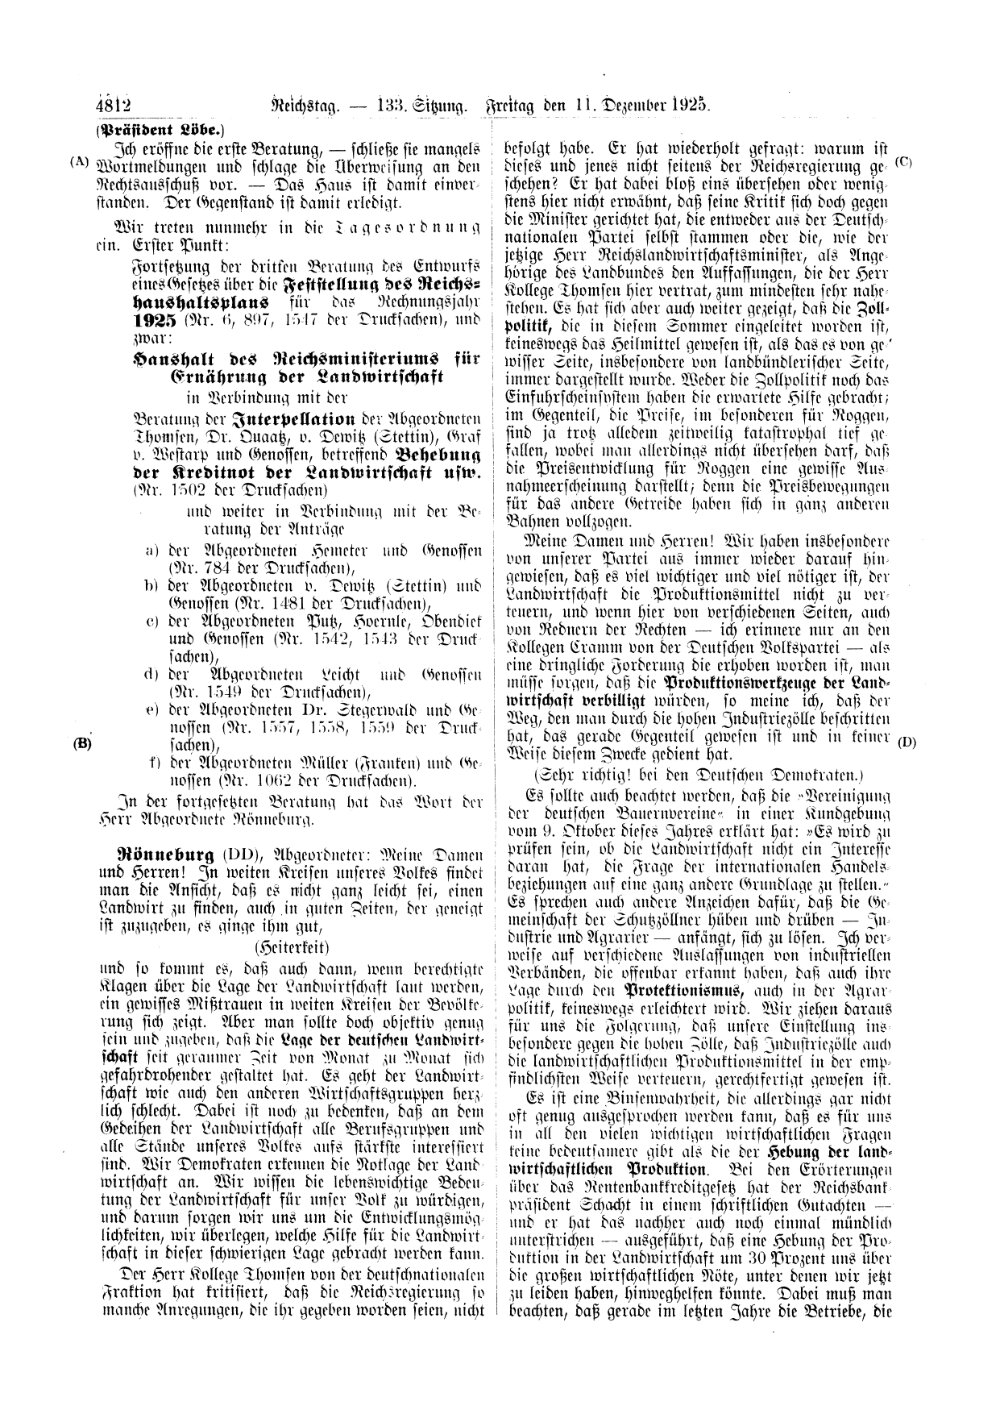 Scan of page 4812